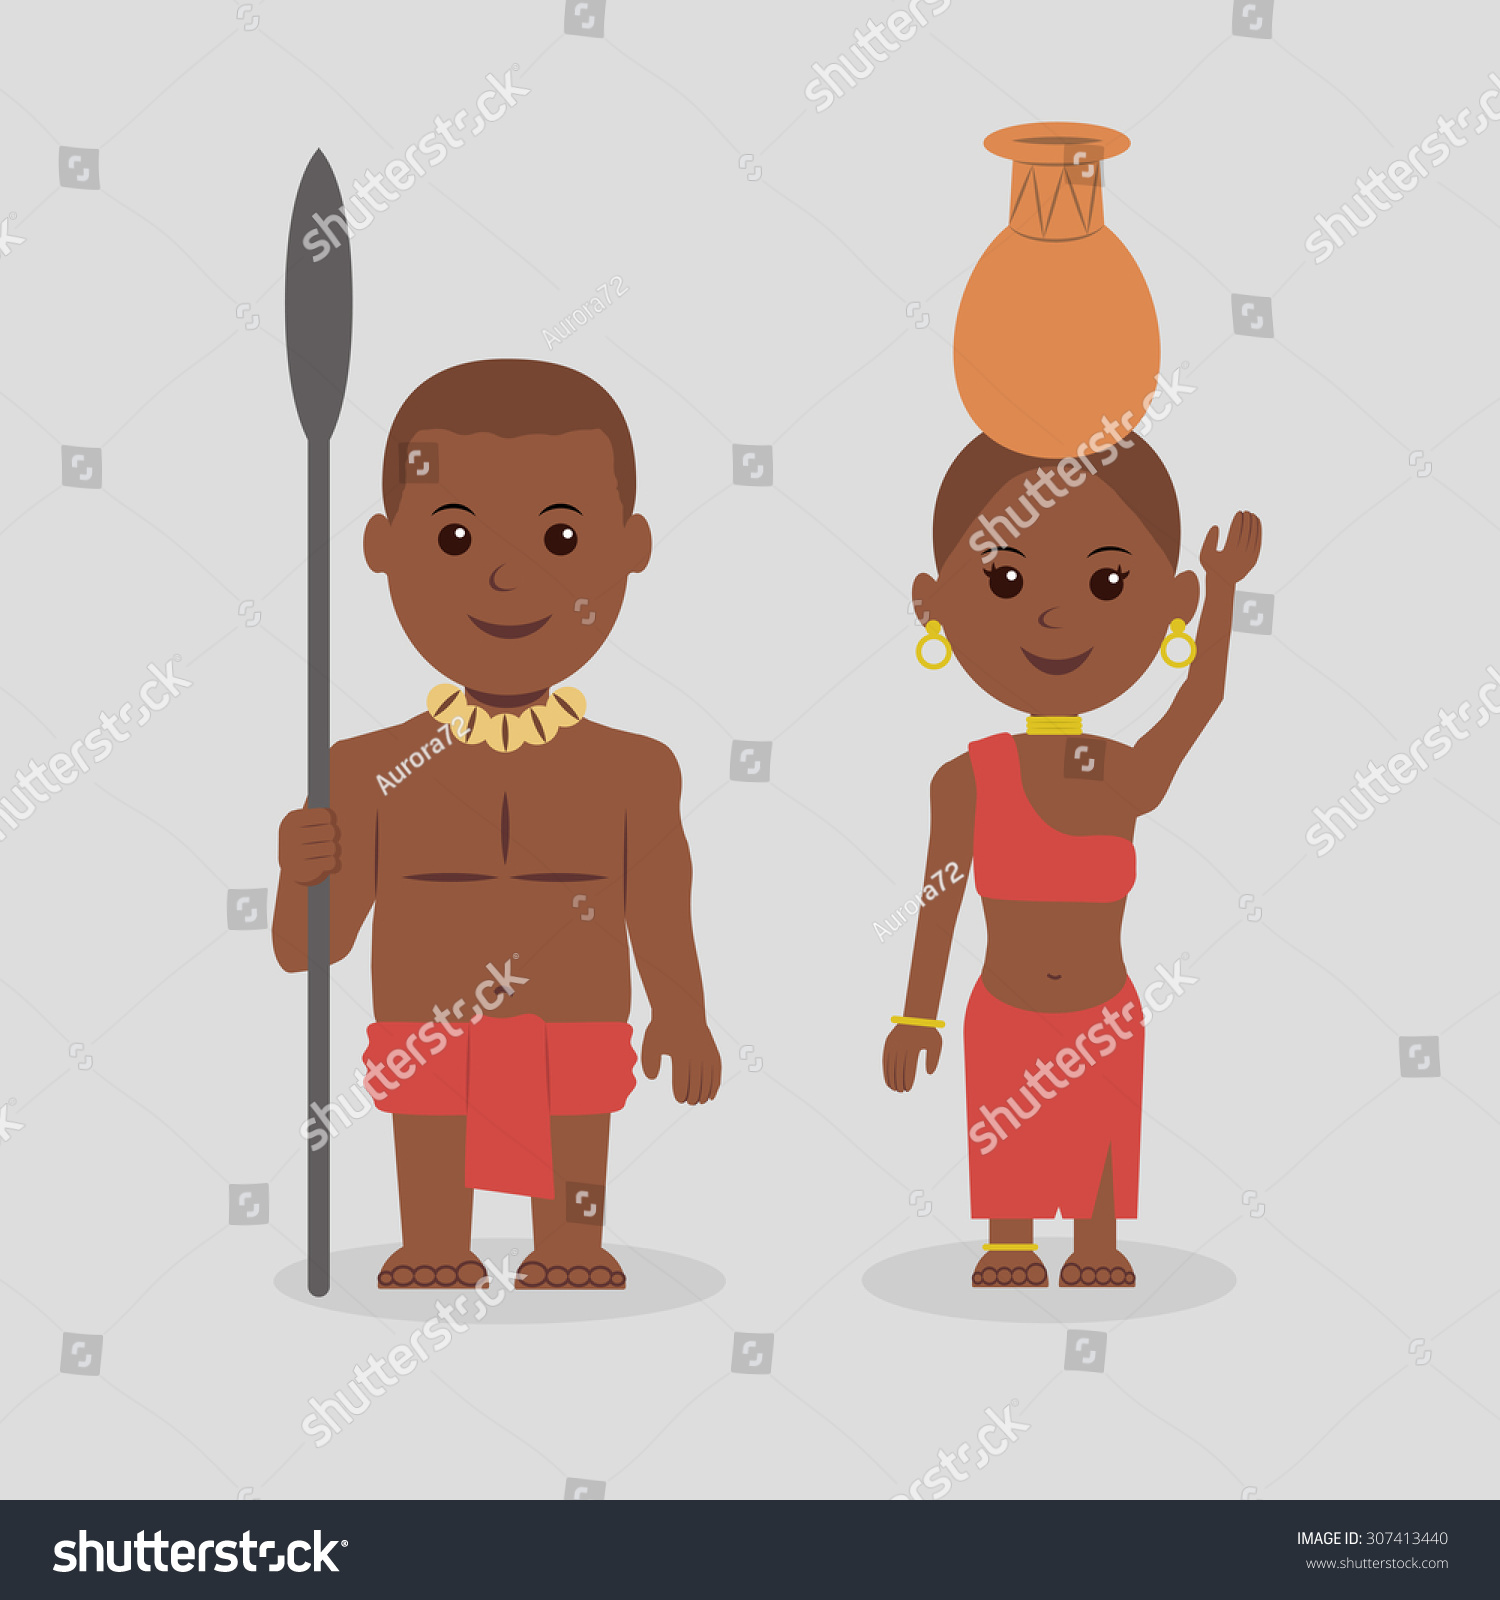 134 African man barefoot Stock Illustrations, Images & Vectors ...